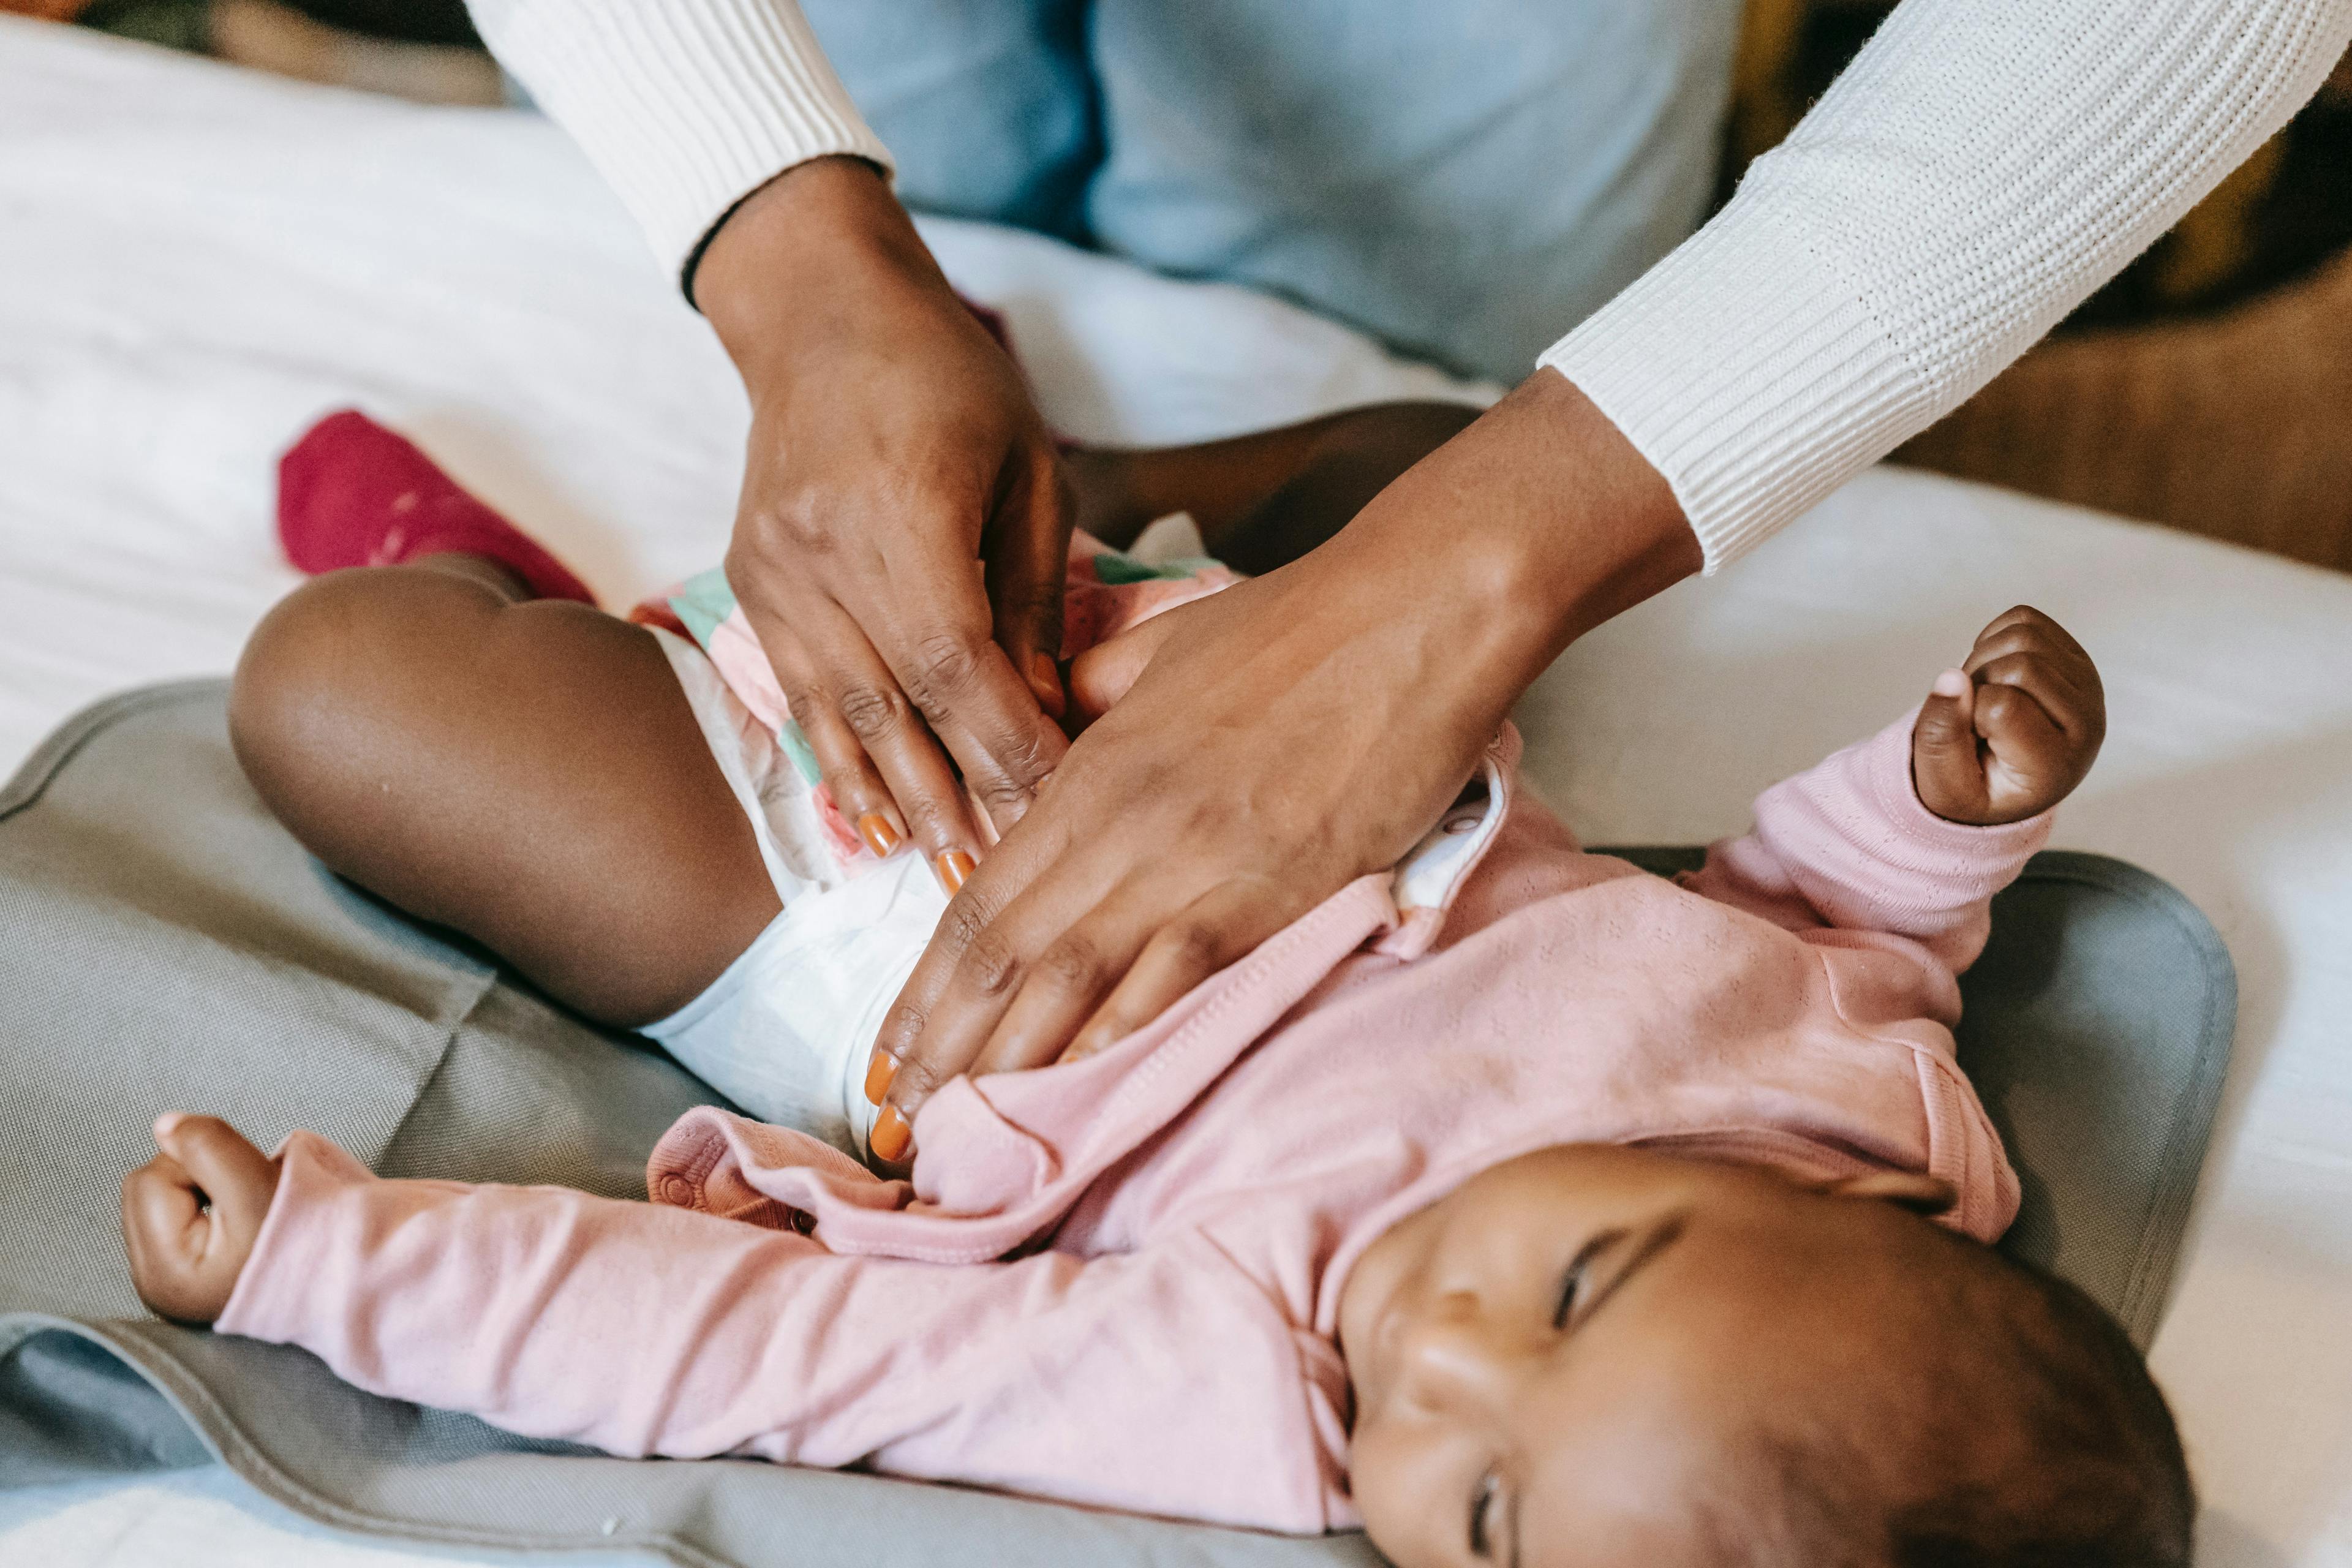 How to Prevent Diaper Rash: A New Parent's Guide to Keeping Baby's Skin Healthy